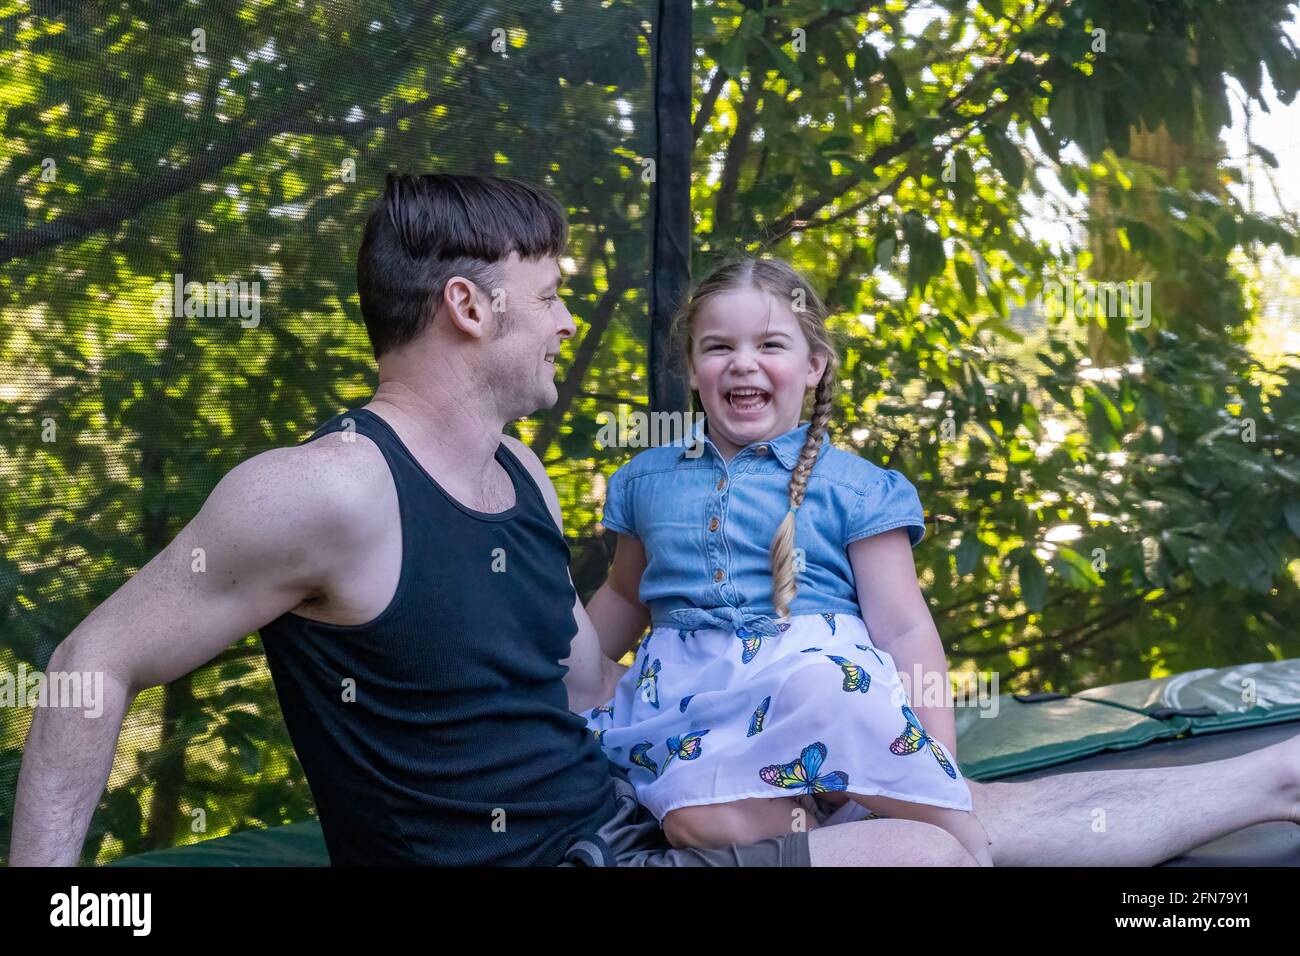 Lynwood, Washington, USA.  Father and four year old daughter taking a rest on their backyard trampoline after playtime. Stock Photo